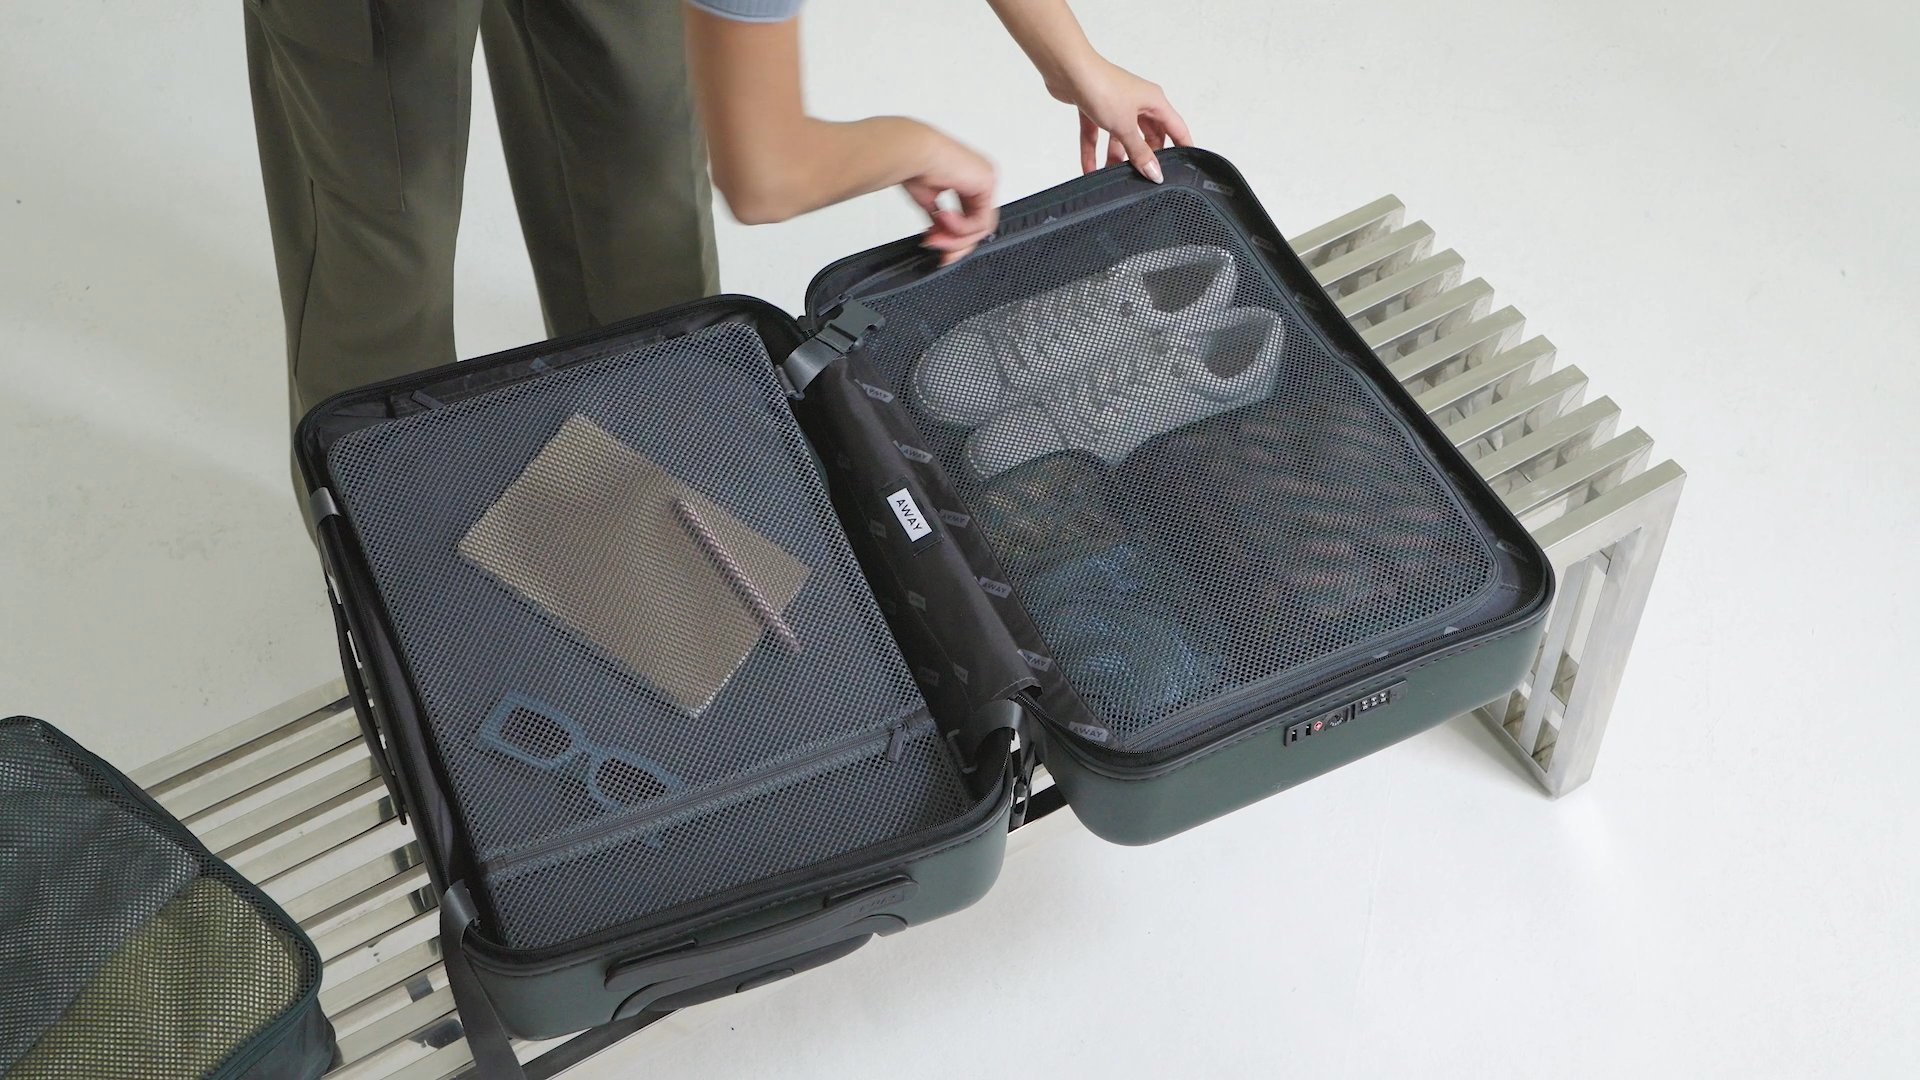 Away's Carry-Ons Now Come with a Leather Laptop Pocket - AFAR